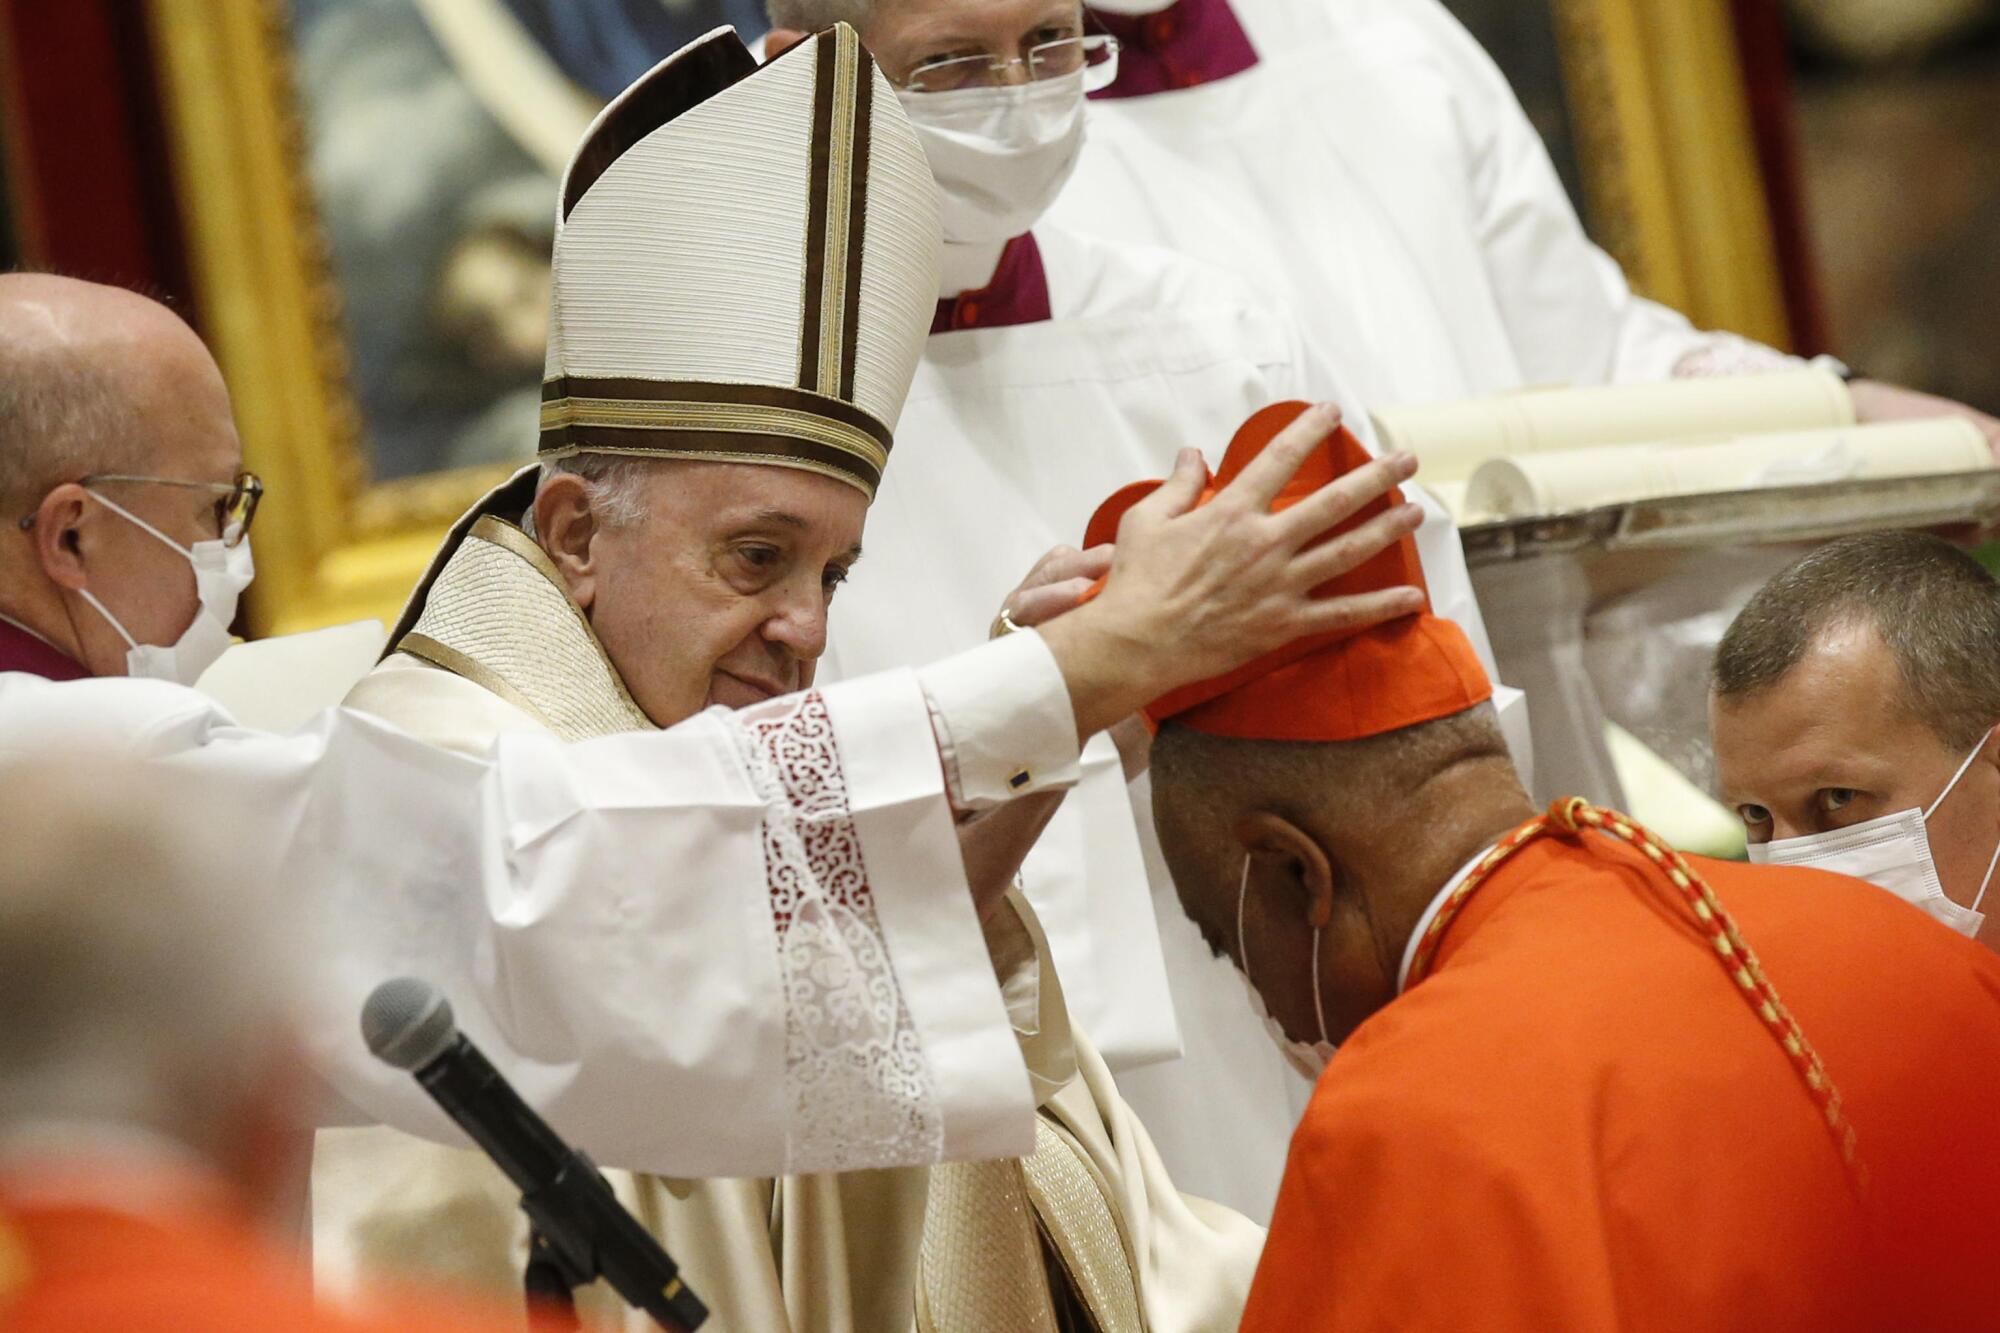 American Wilton D. Gregory receives his biretta as he is appointed cardinal by Pope Francis  during a consistory ceremony.